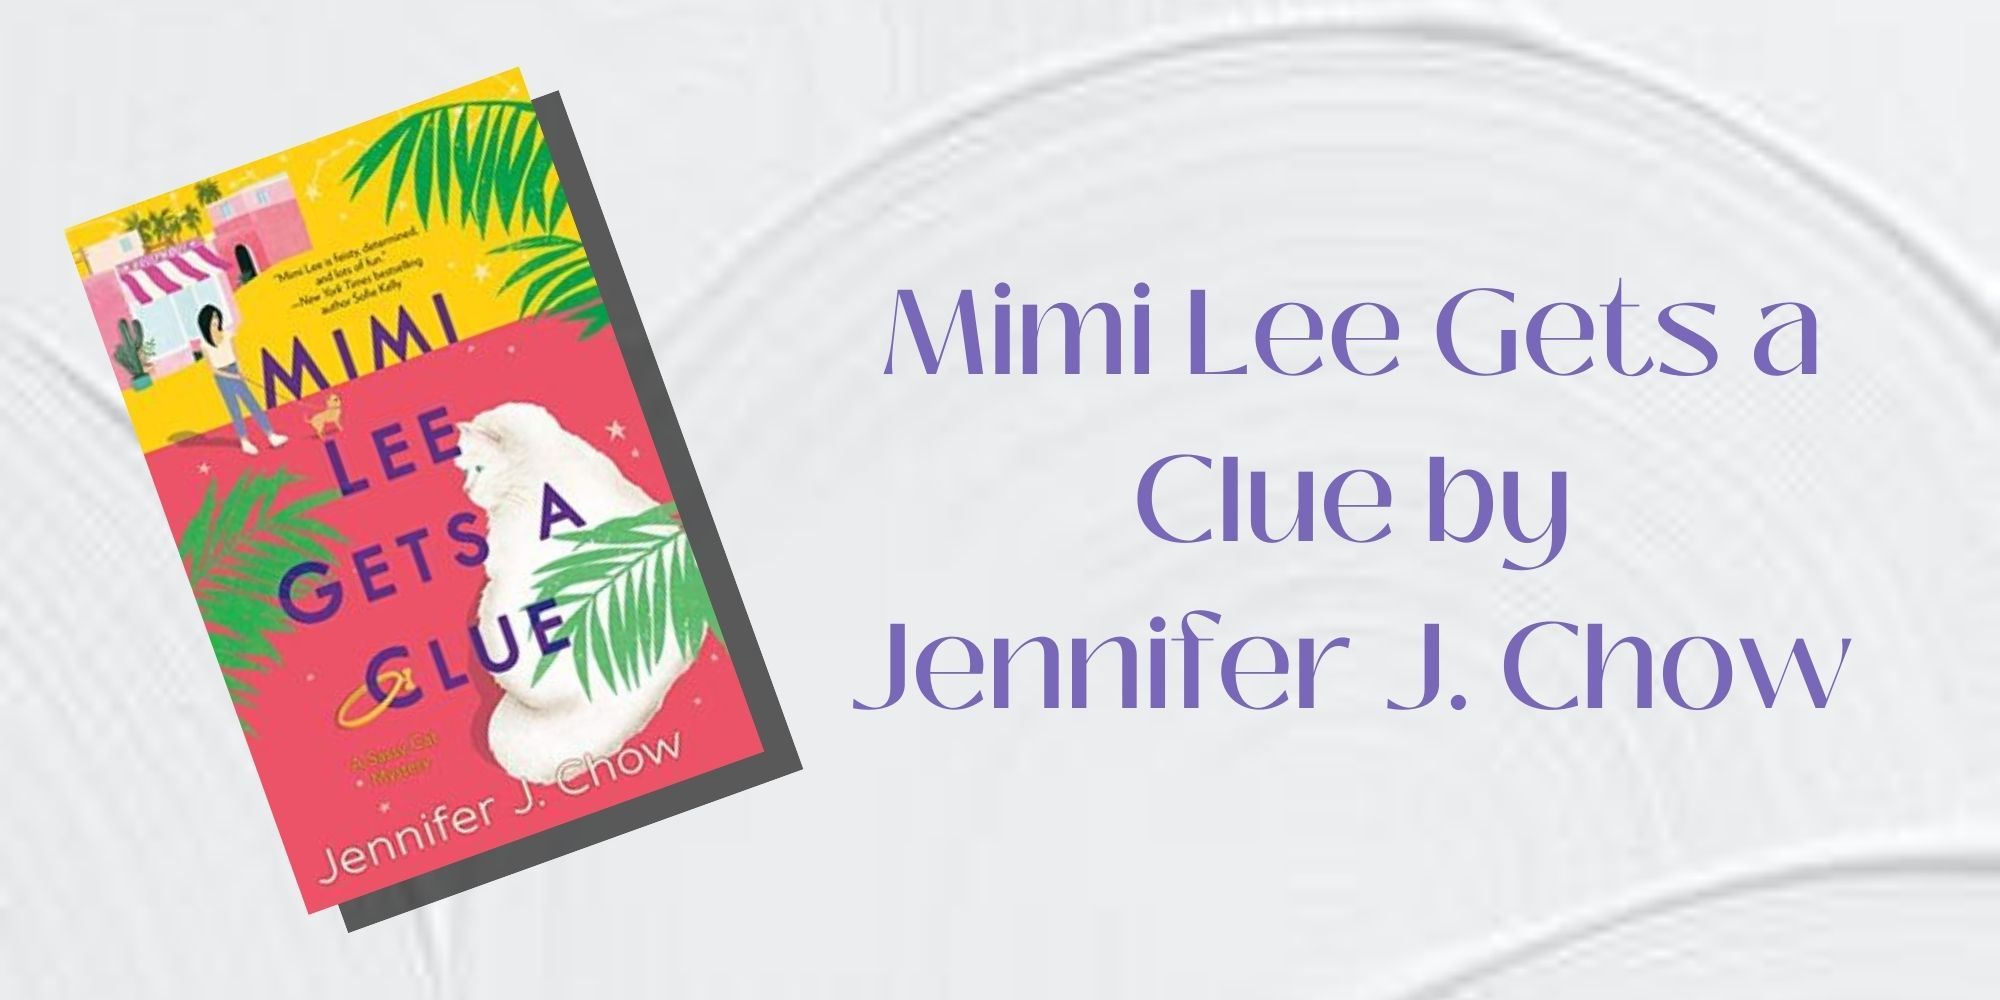 The cover of Mimi Lee Gets a Clue by Jennifer J. Chow